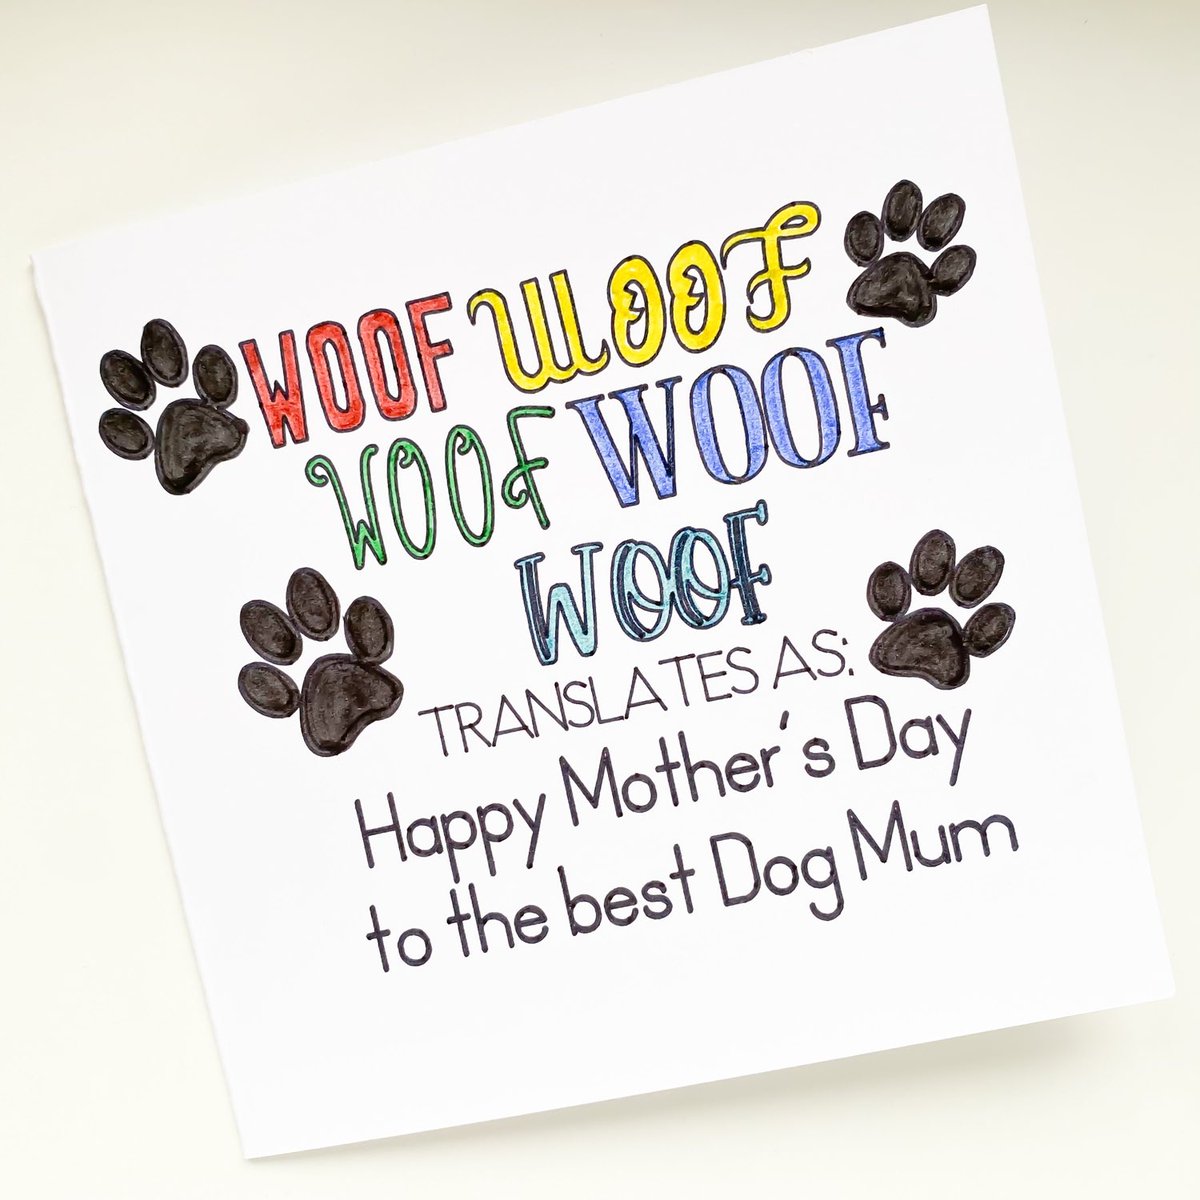 Excited to share this item from my #etsyshop
Woof Happy Mother's Day to the Best Dog Mum handmade Greeting Card etsy.me/3KYjOlr

#mhhsbd #UKGiftAM #SBS #shopindie #UKMakers #CraftBizParty #SmartSocial #etsyme #handmade #DogsofTwitter #MothersDay2023